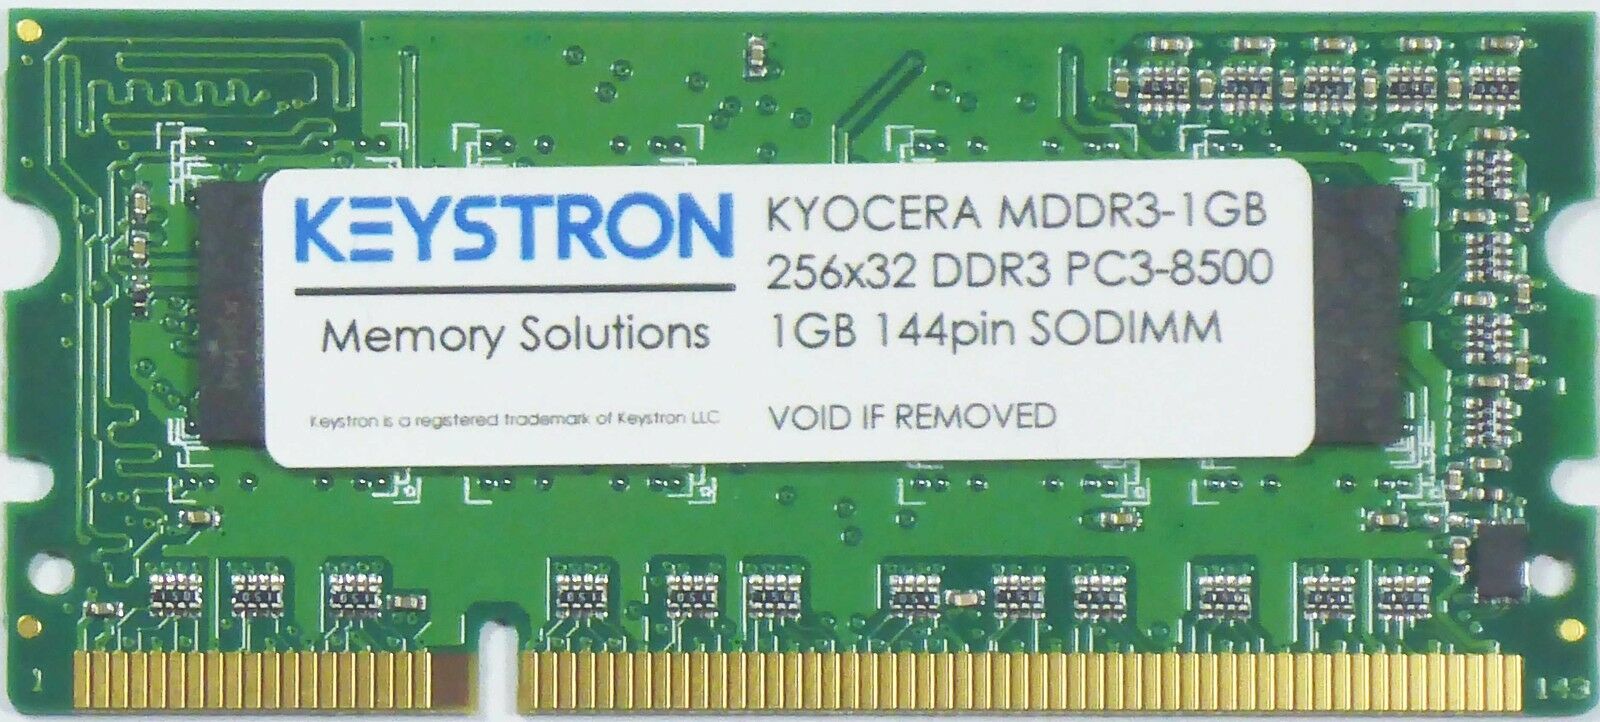 1gb Ddr3 144pin Mddr3-1gb Memory For Kyocera Ecosys Laser Printers 870lm00097